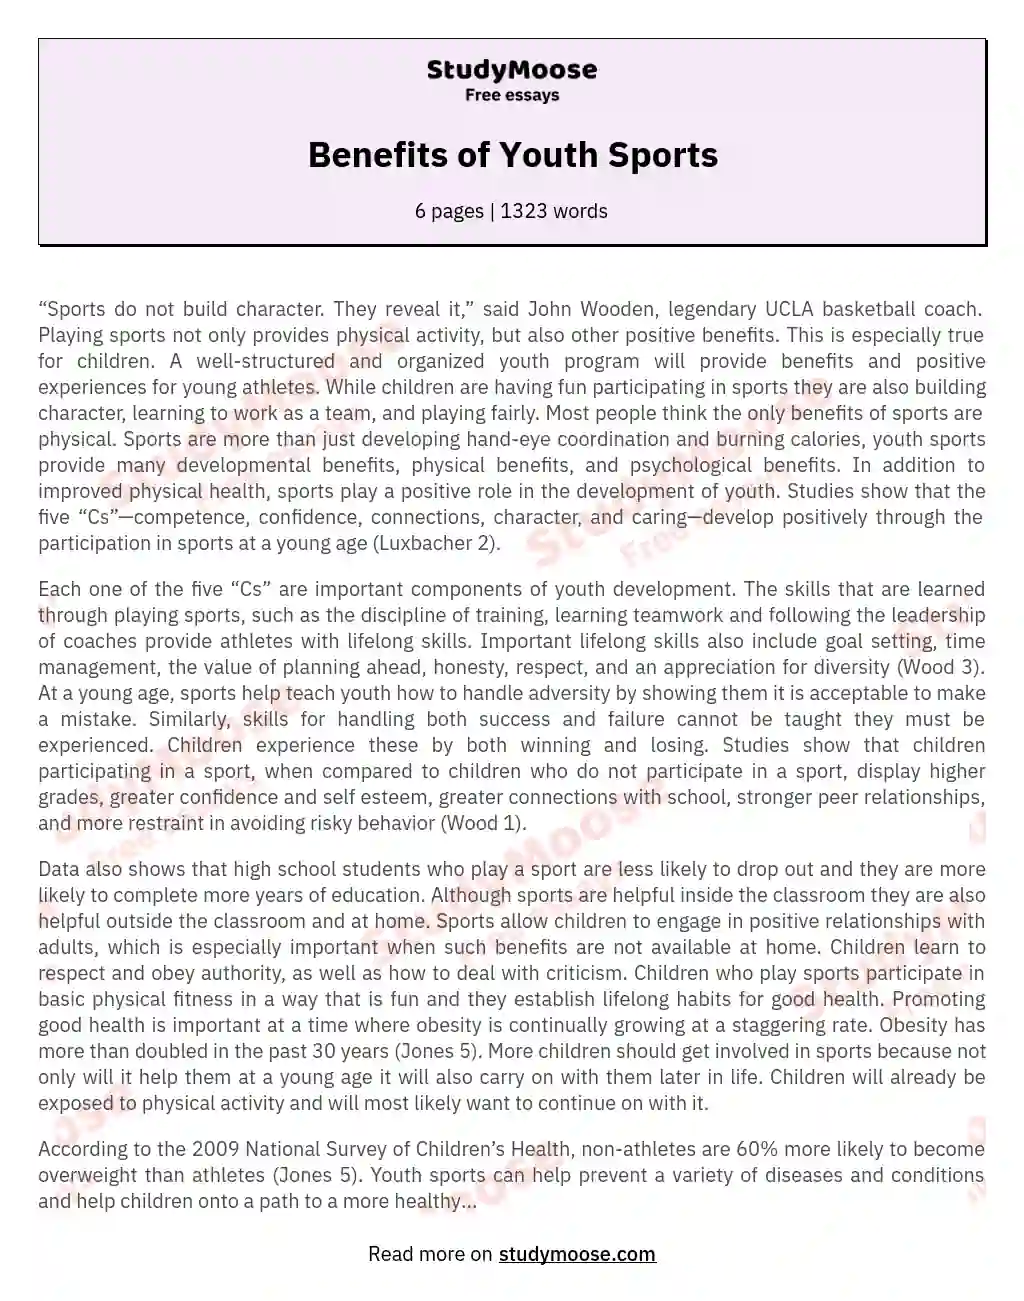 thesis statements on youth sports